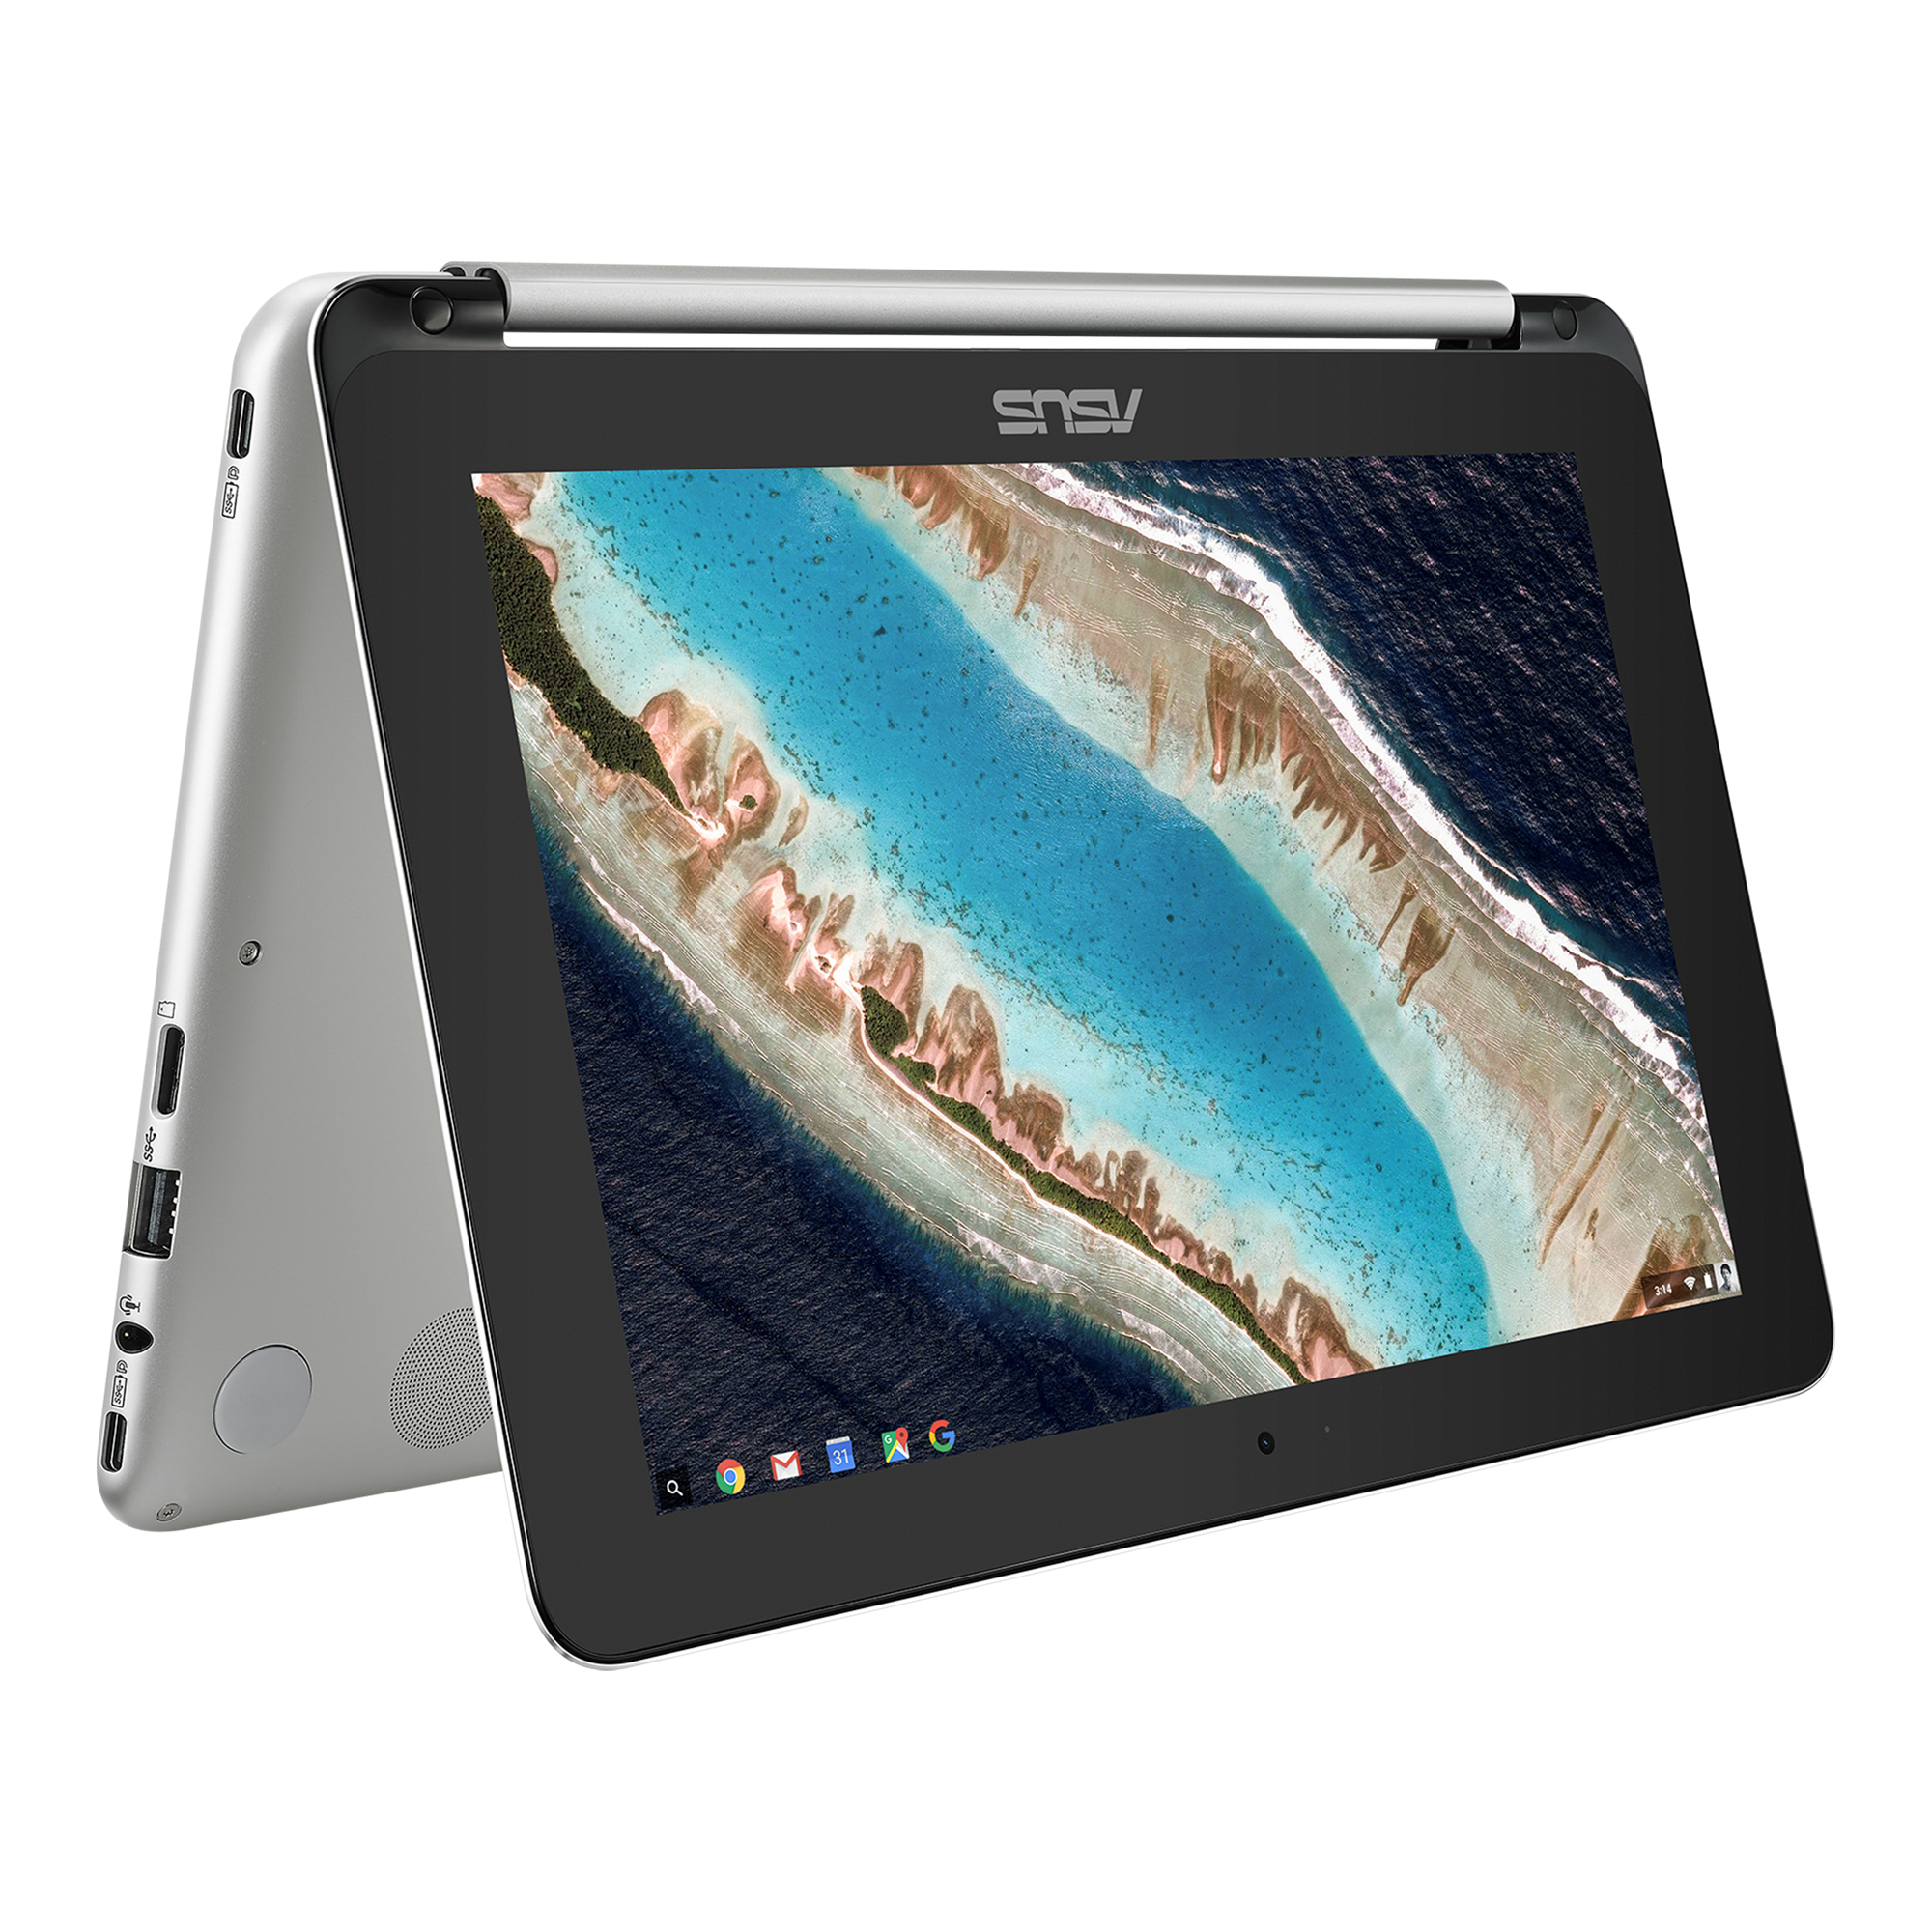 ASUS Chromebook Flip C101｜Laptops For Home｜ASUS USA